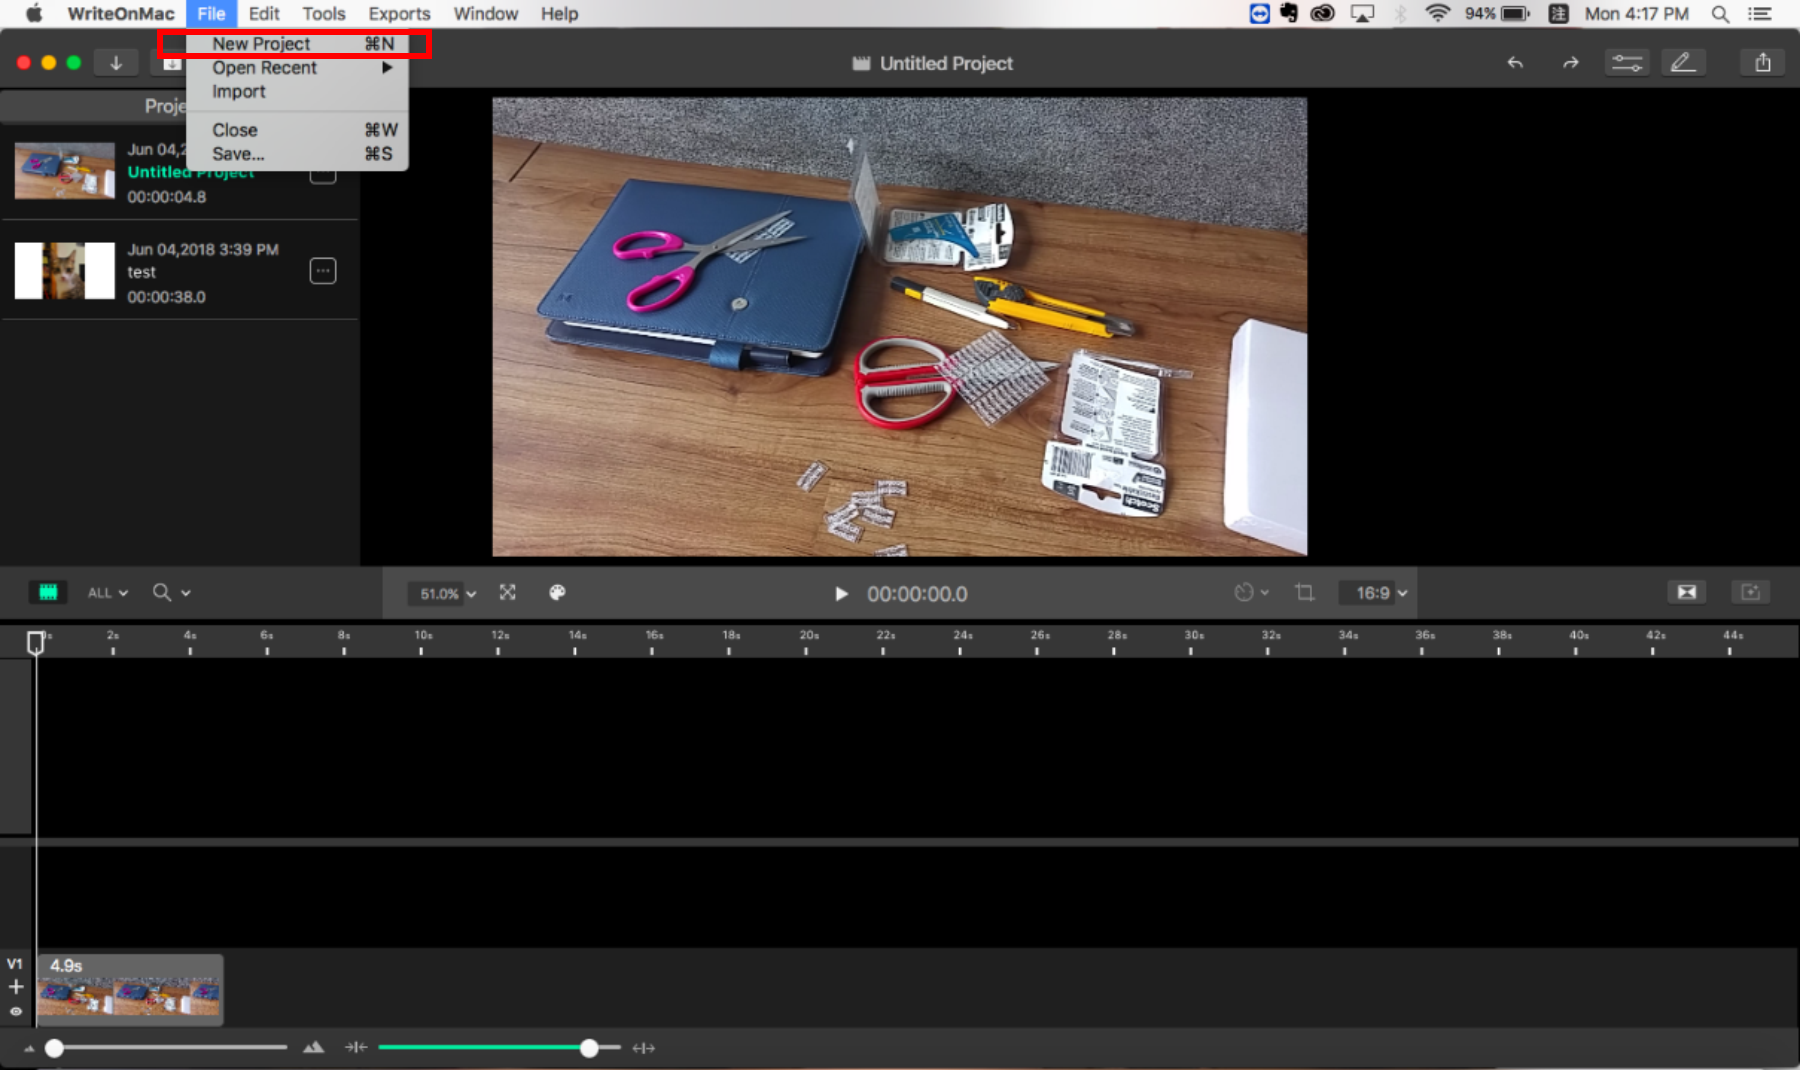 Write-on_Video_Mac_video_Editor-My_project_01.png